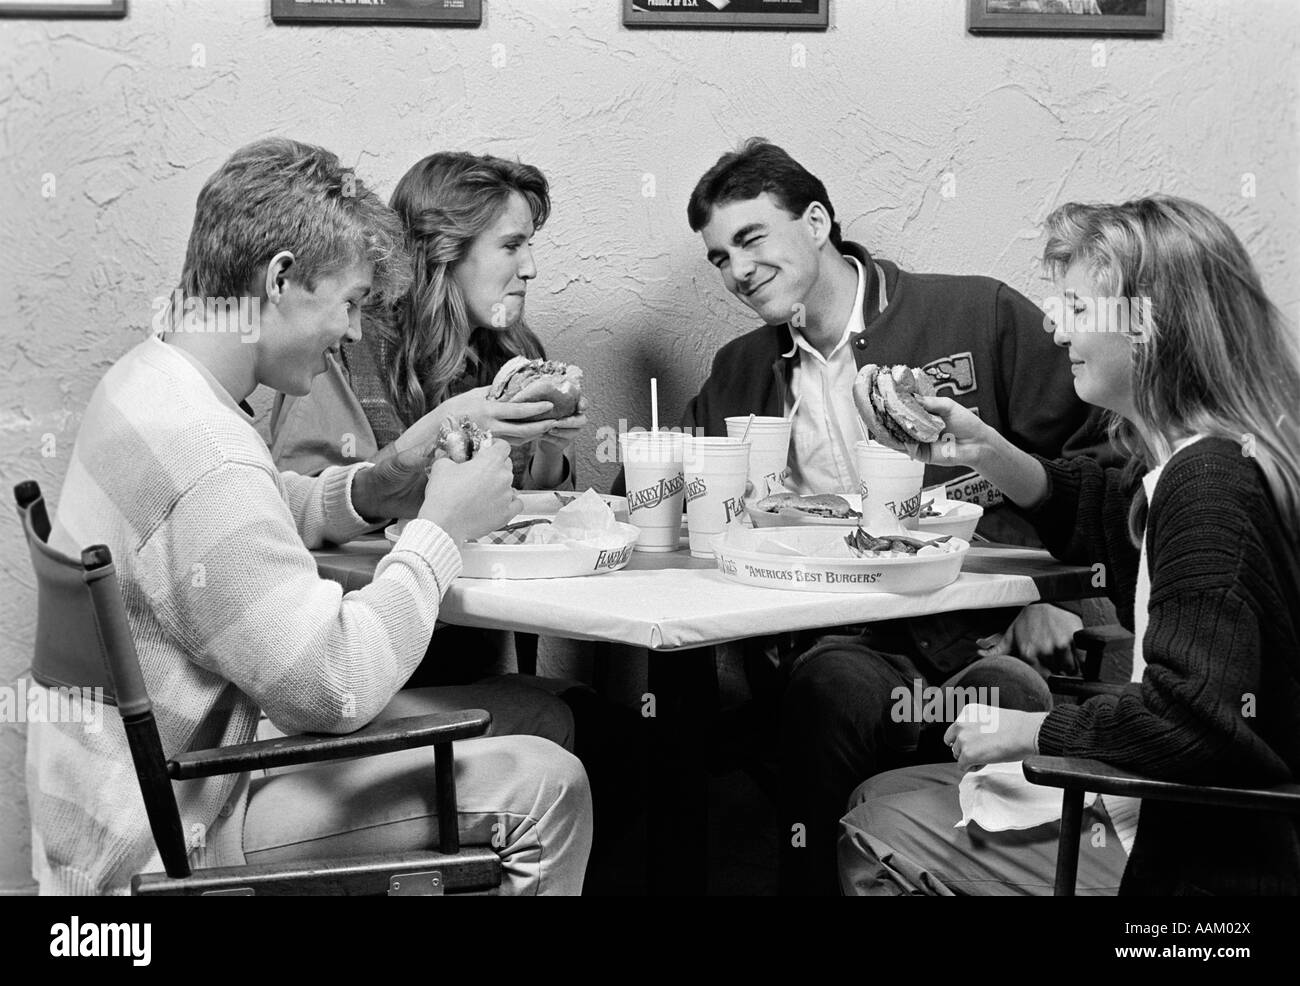 1980s GROUP OF FOUR TEENS SITTING AROUND TABLE AT RESTAURANT CHATTING & EATING HAMBURGERS Stock Photo